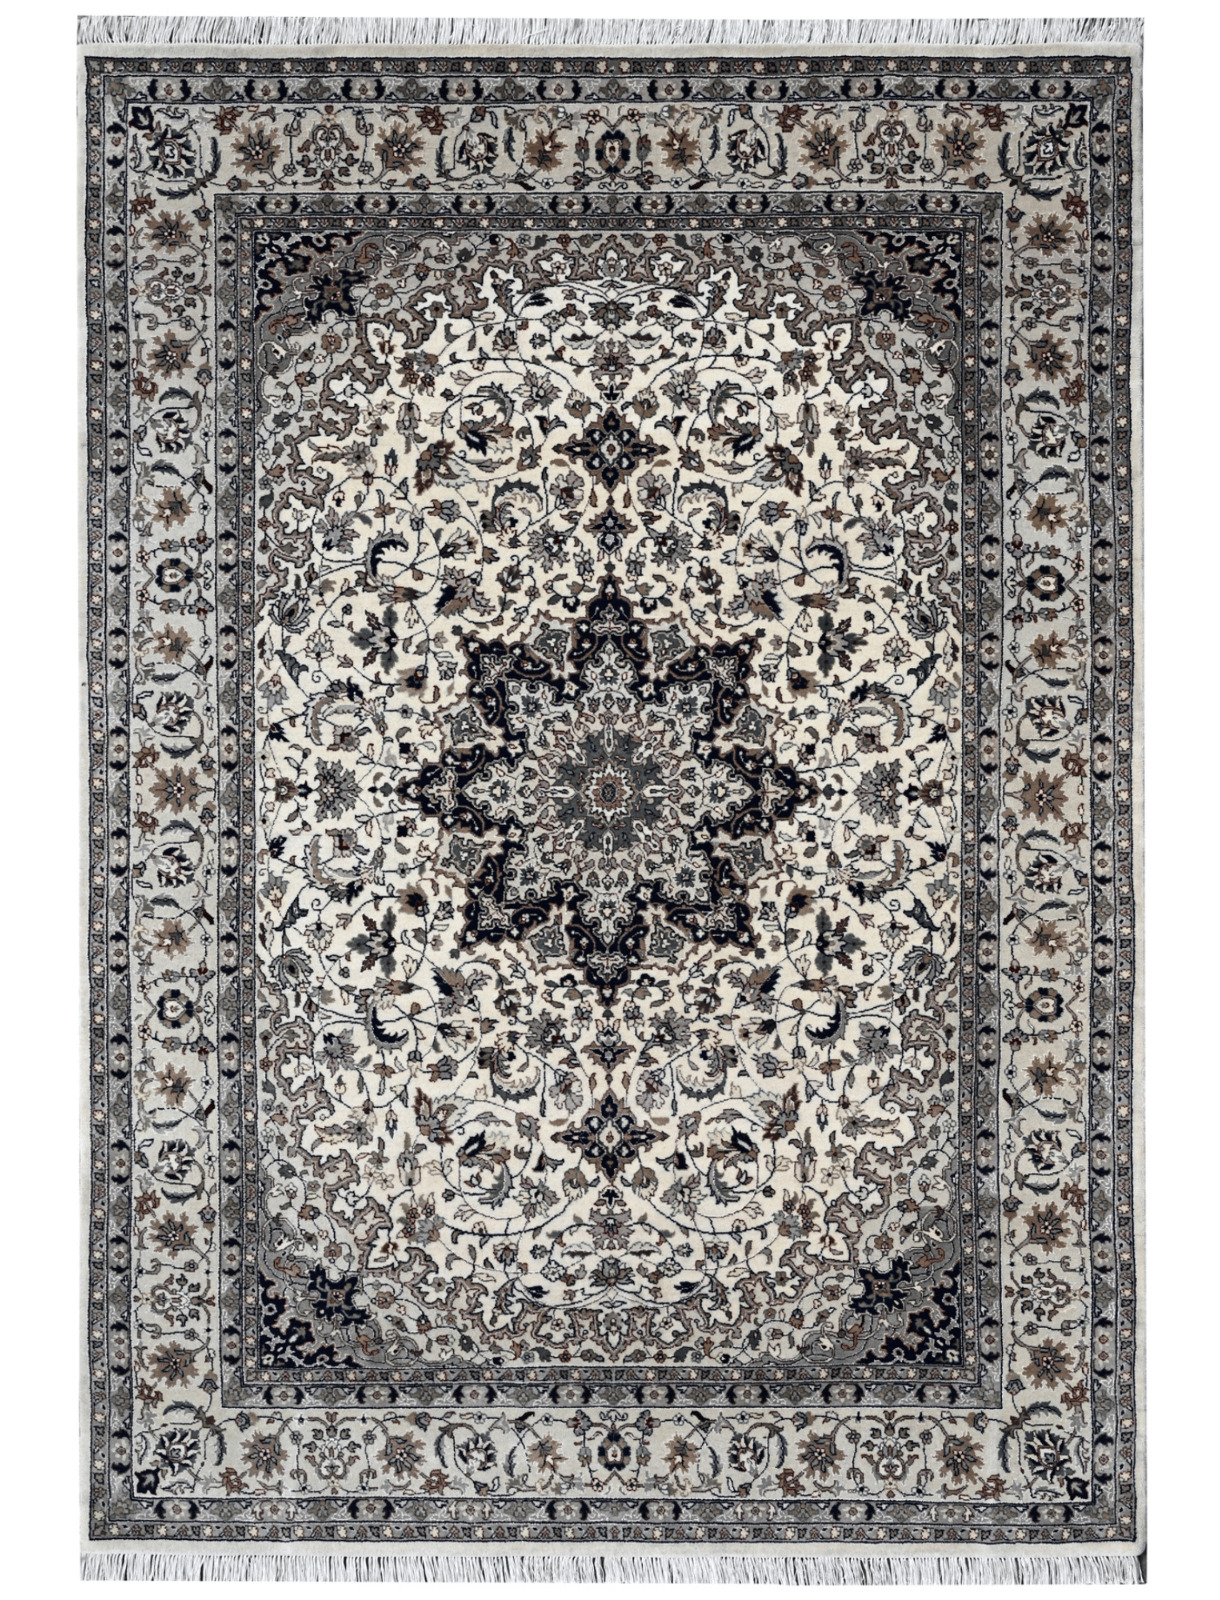 NAIN 5x8ft Handknotted Rug Luxury Look Carpet Wool Handmade Traditional Area Rug